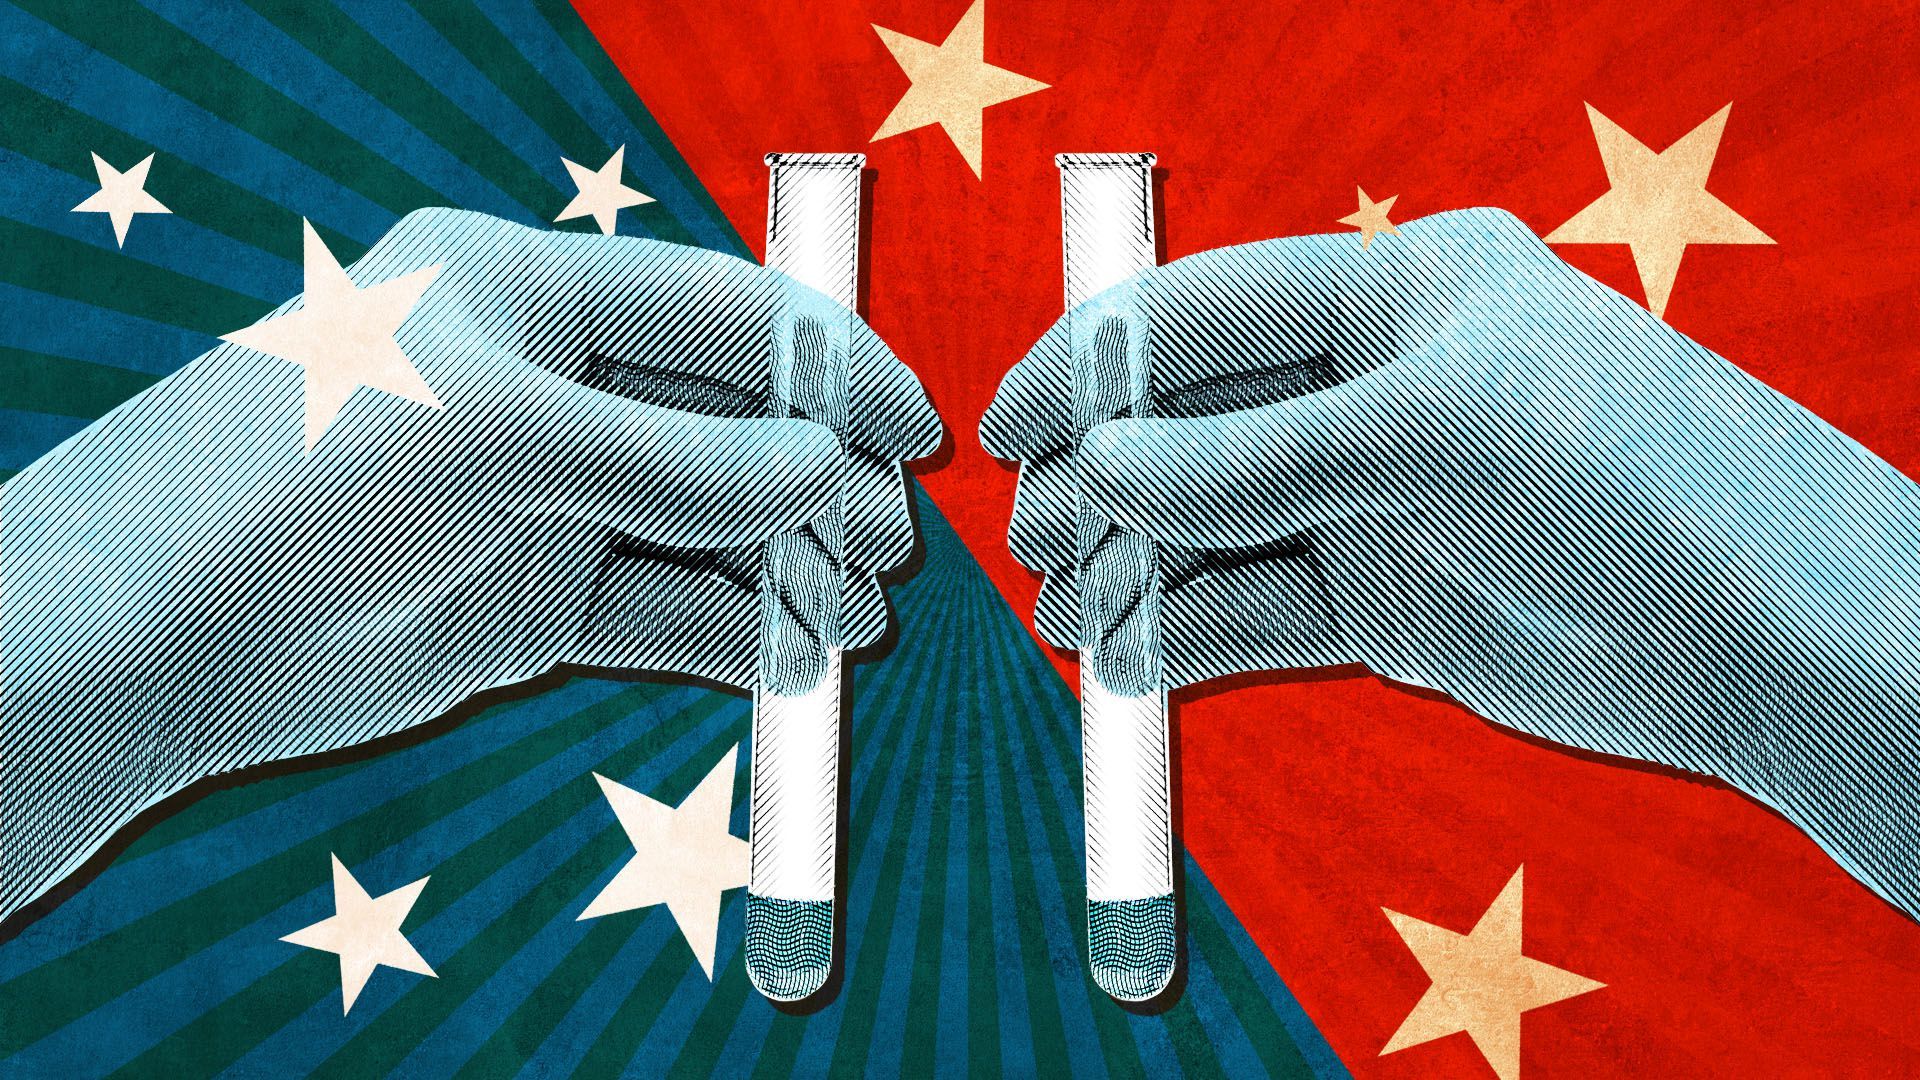 Illustration of tow hands holding test tubes facing each other over a background of stripes and stars